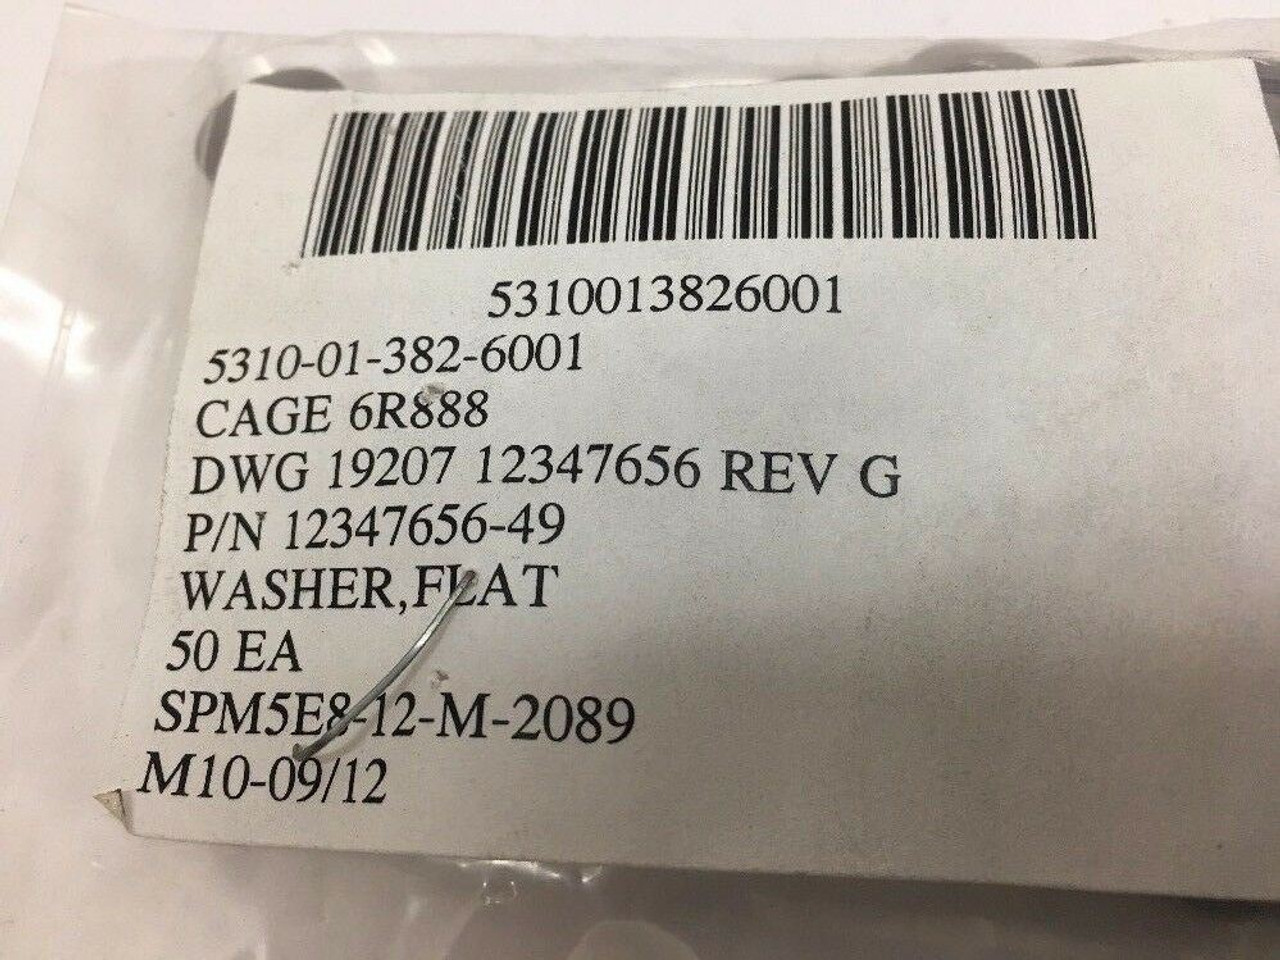 Flat Washer 12347656-49 J.T.D Stamping Lot of 50